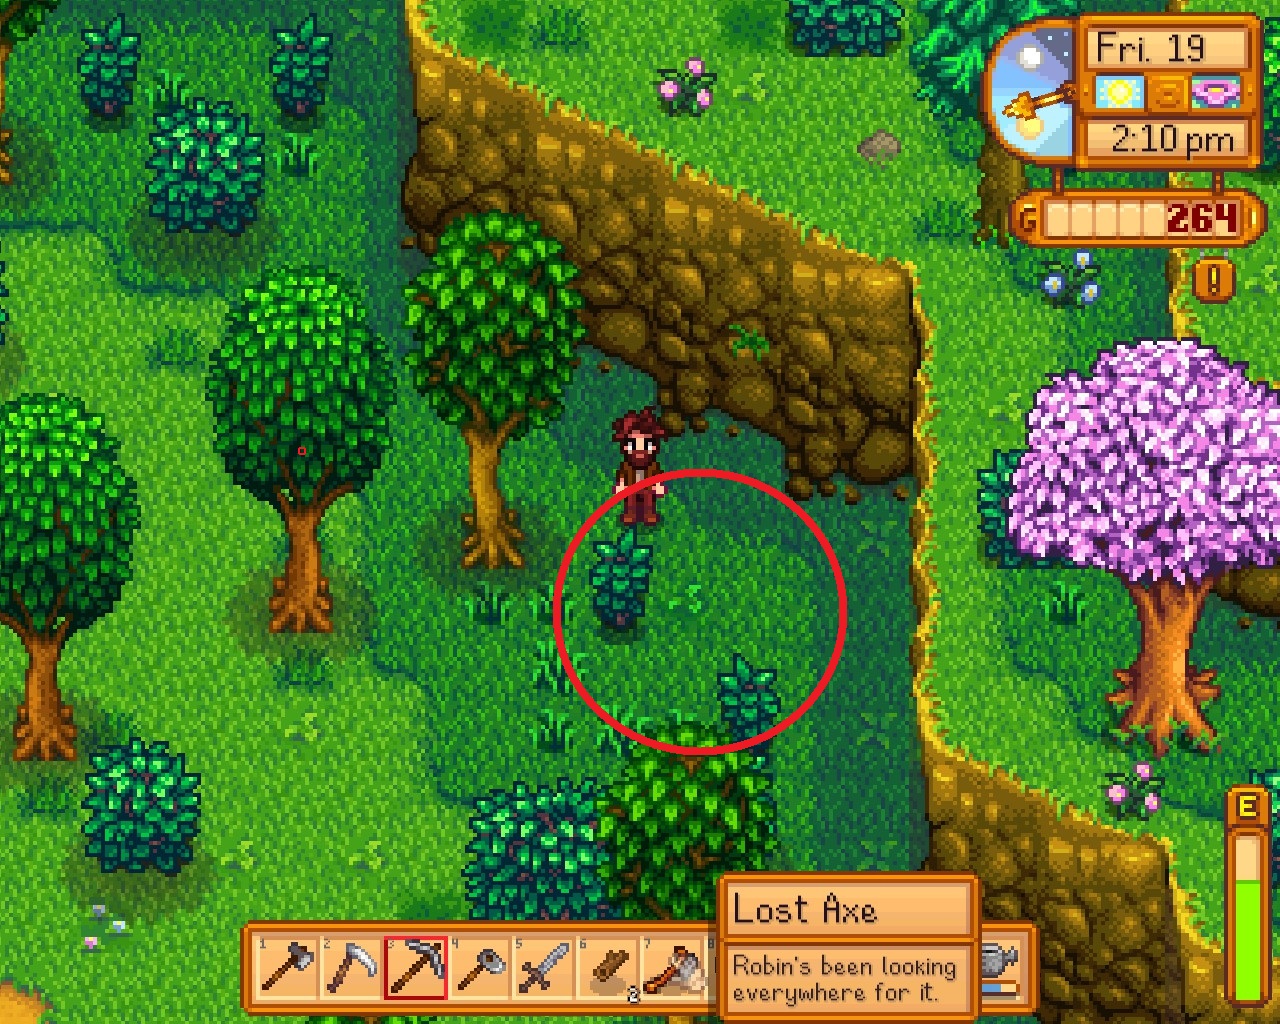 Where to find Robin's Lost Axe for quest Stardew Valley.